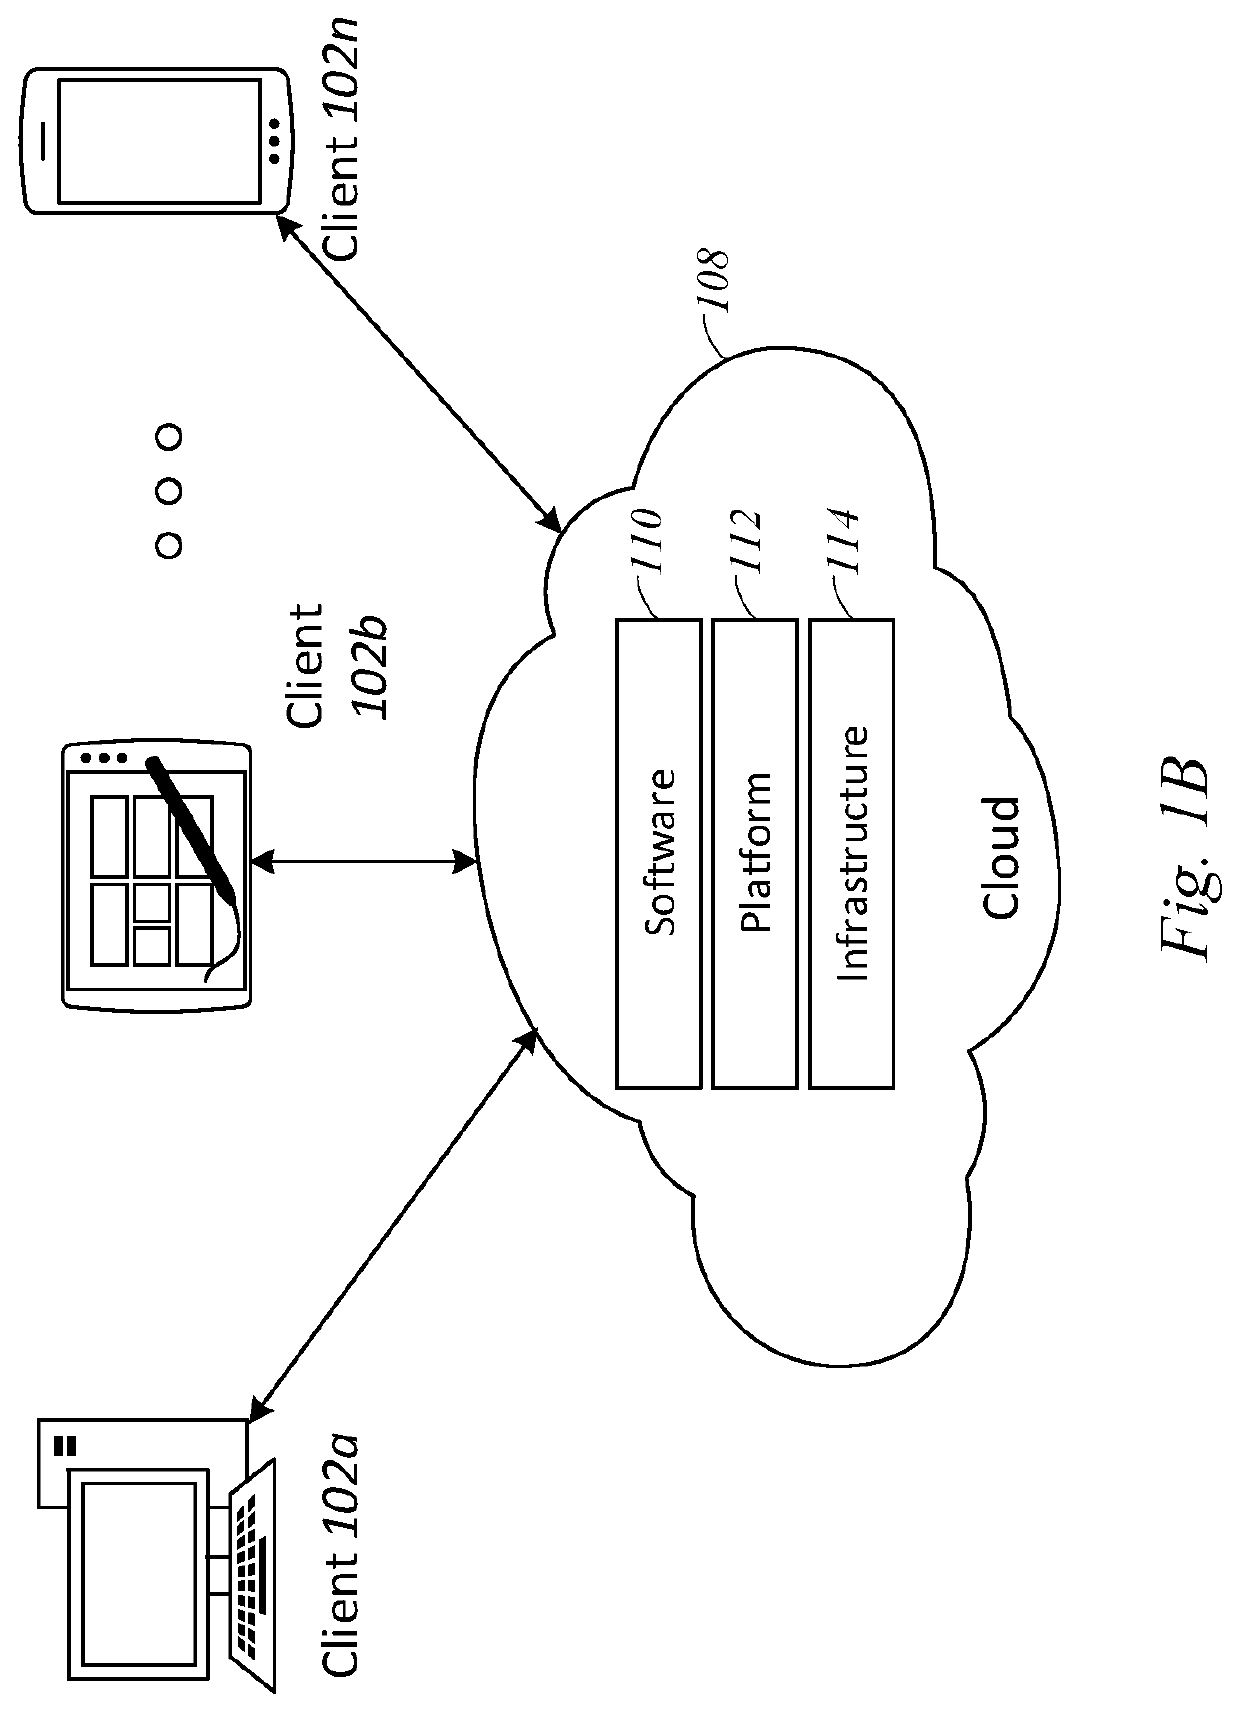 System and methods for minimizing organization risk from users associated with a password breach